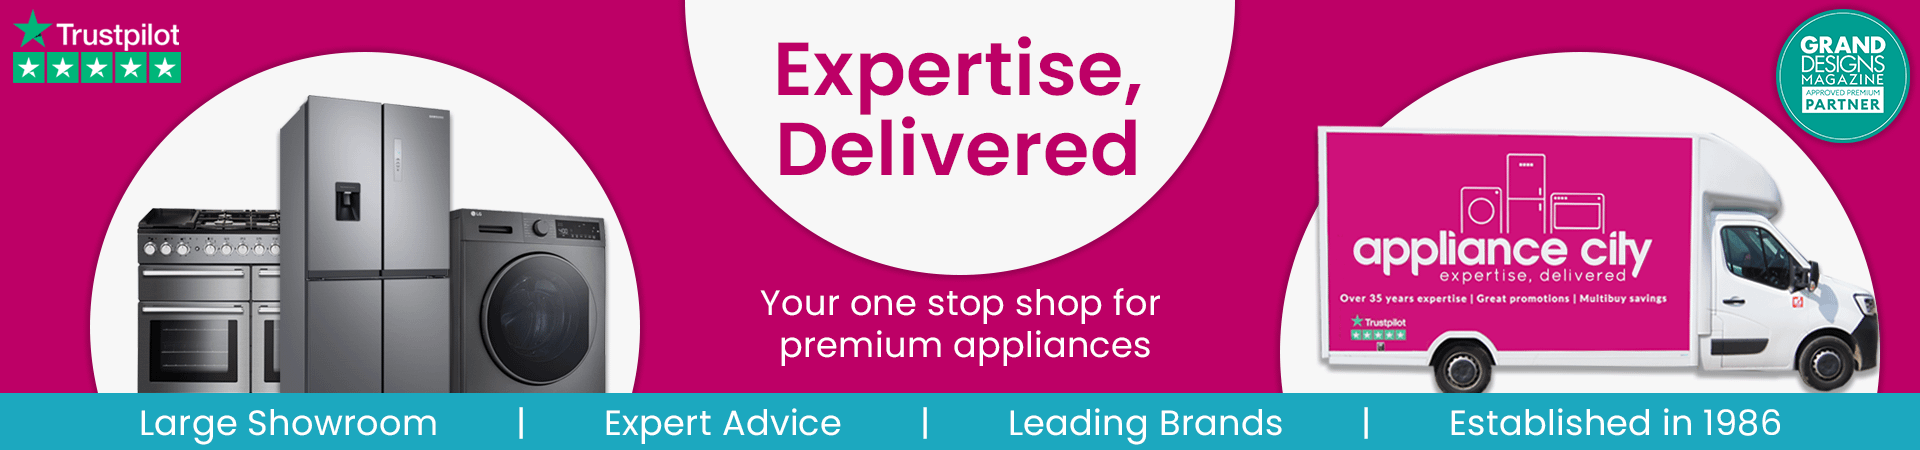 A bright pink image featuring a range cooker, American style fridge freezer and washing machine alongside an Appliance City van. Message says 'Expertise Delivered: Your one stop shop for premium appliances'